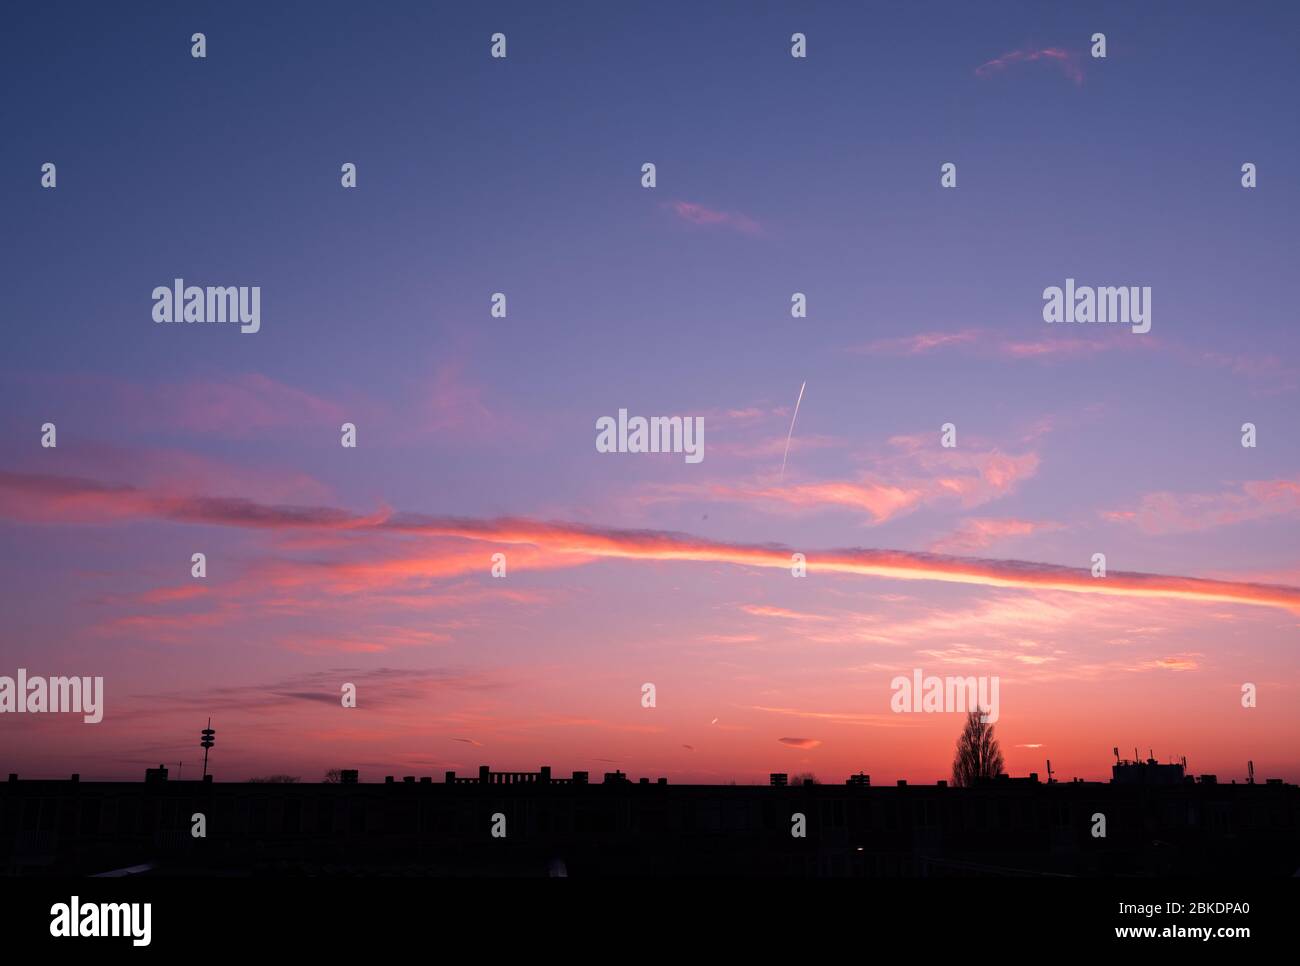 Silhouette of city skyline at sunset, The Hague, Netherlands Stock Photo